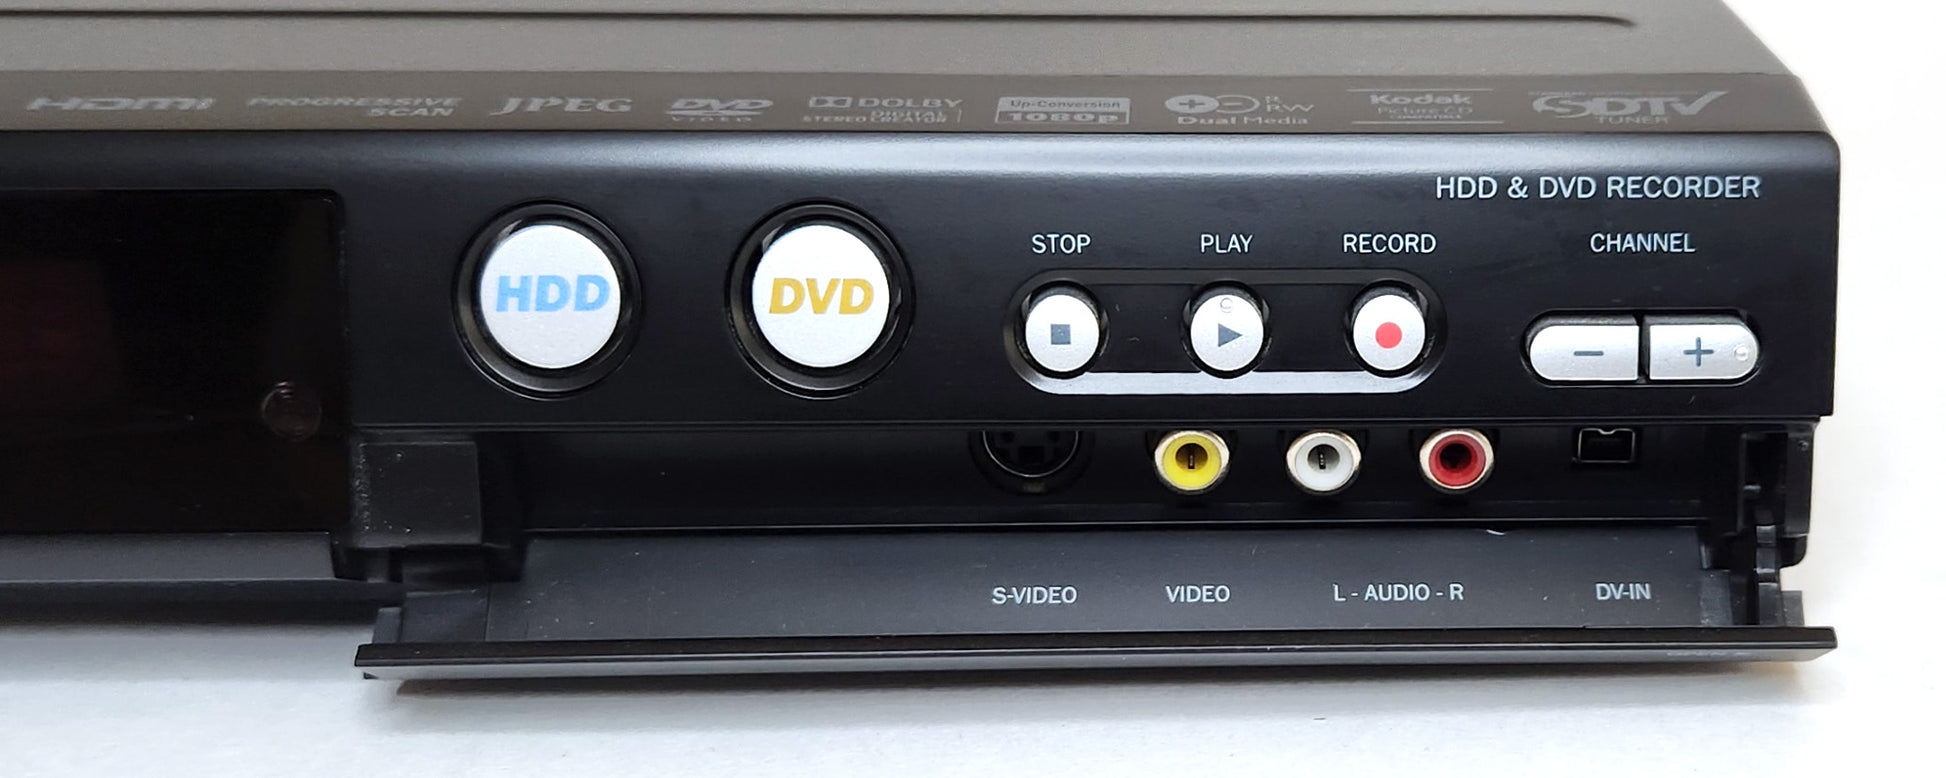 Magnavox MDR533H HDD/DVD Hard Disk Recorder with ATSC Tuner - Front Detail